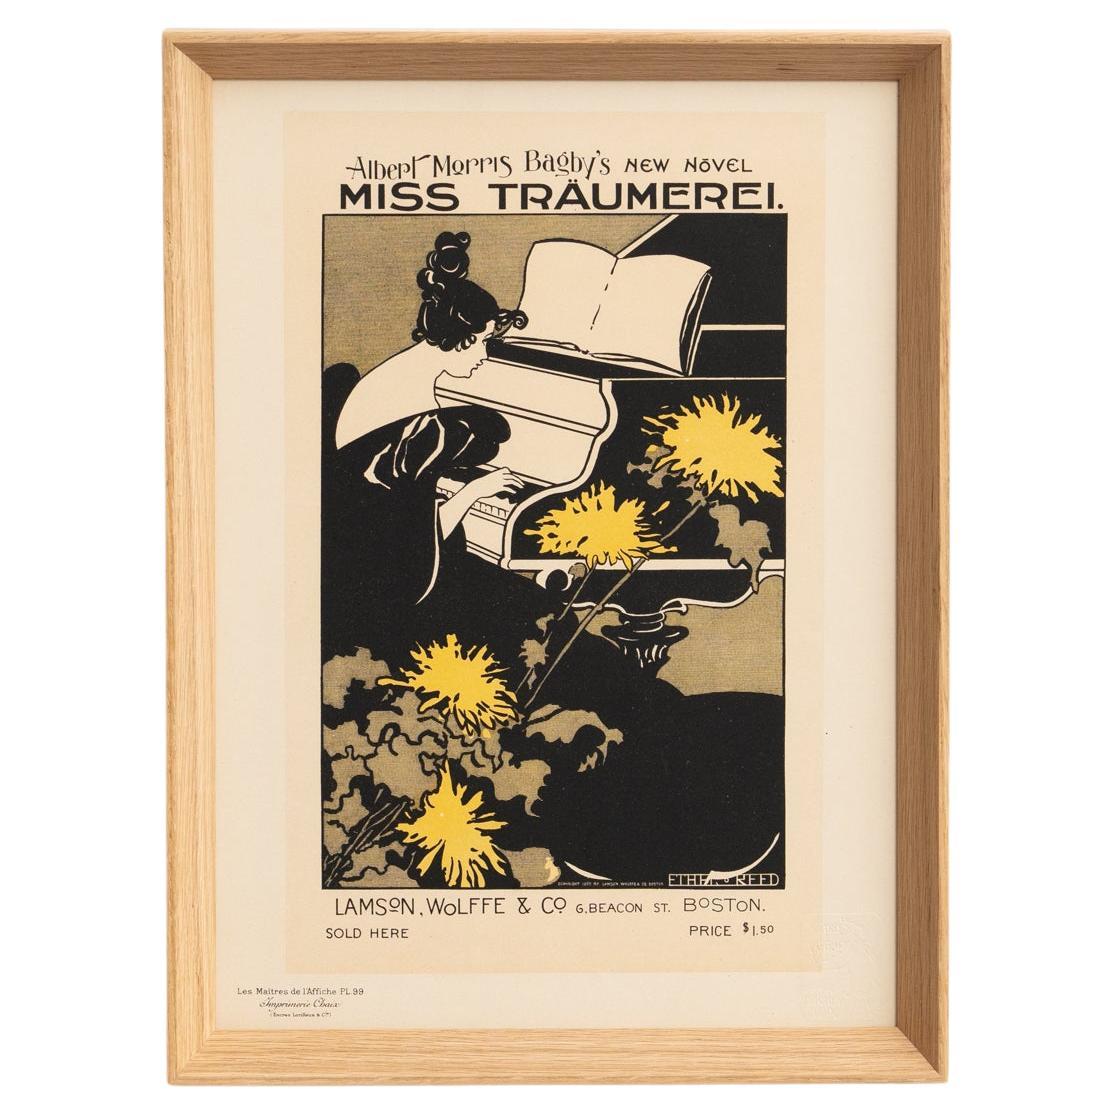 Miss Traumerei Artwork by Ethel Reed by Les Maitres de l'Affiche, circa 1930